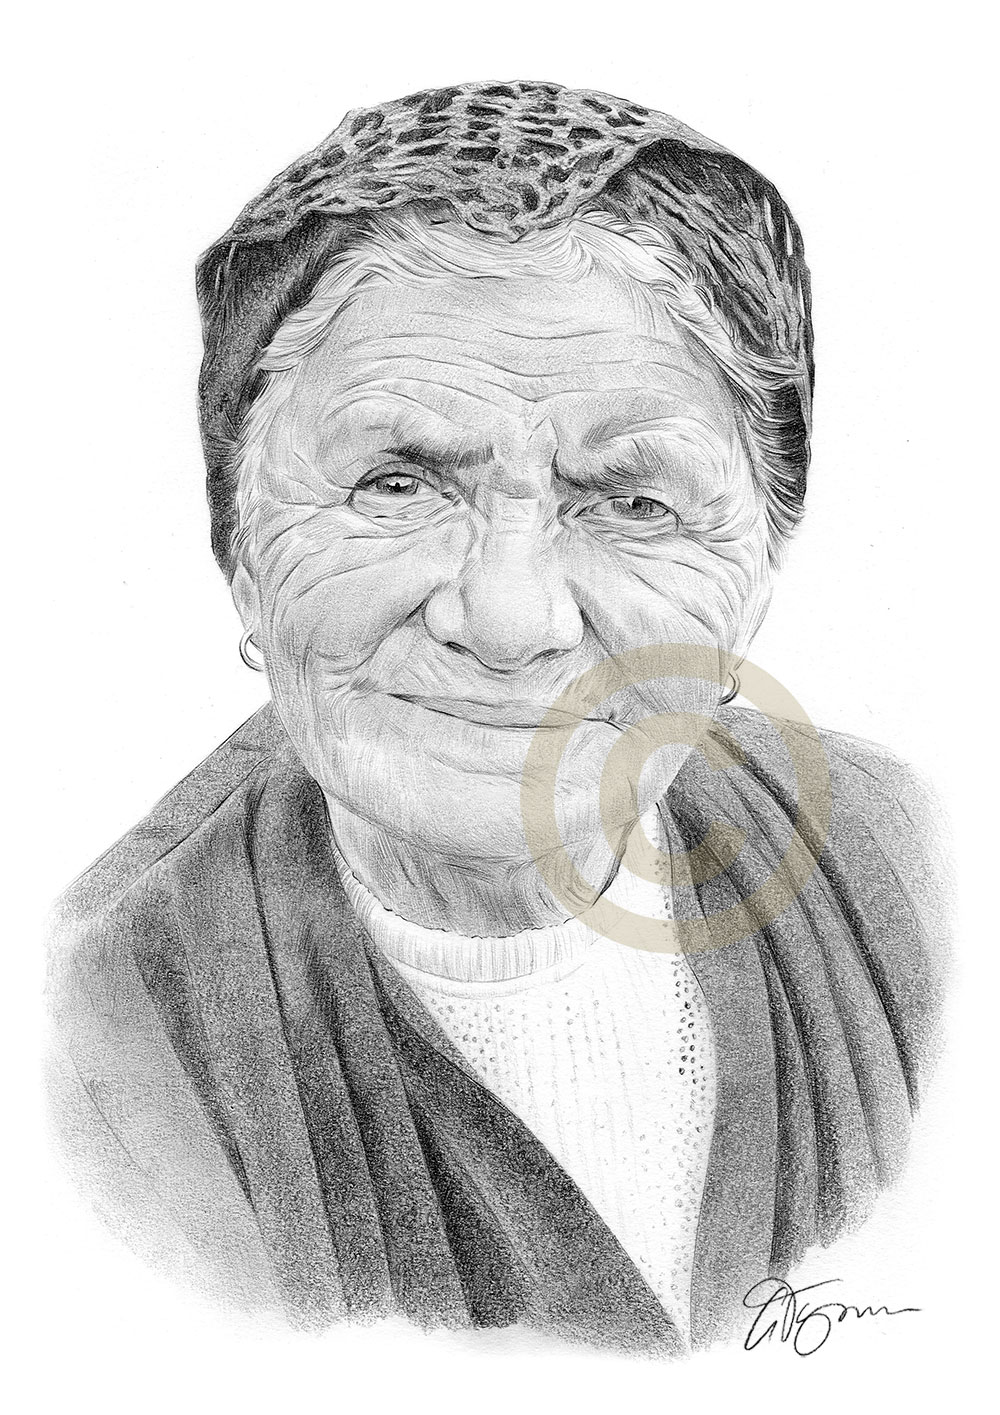 Pencil portrait commission of a grandmother by artist Gary Tymon